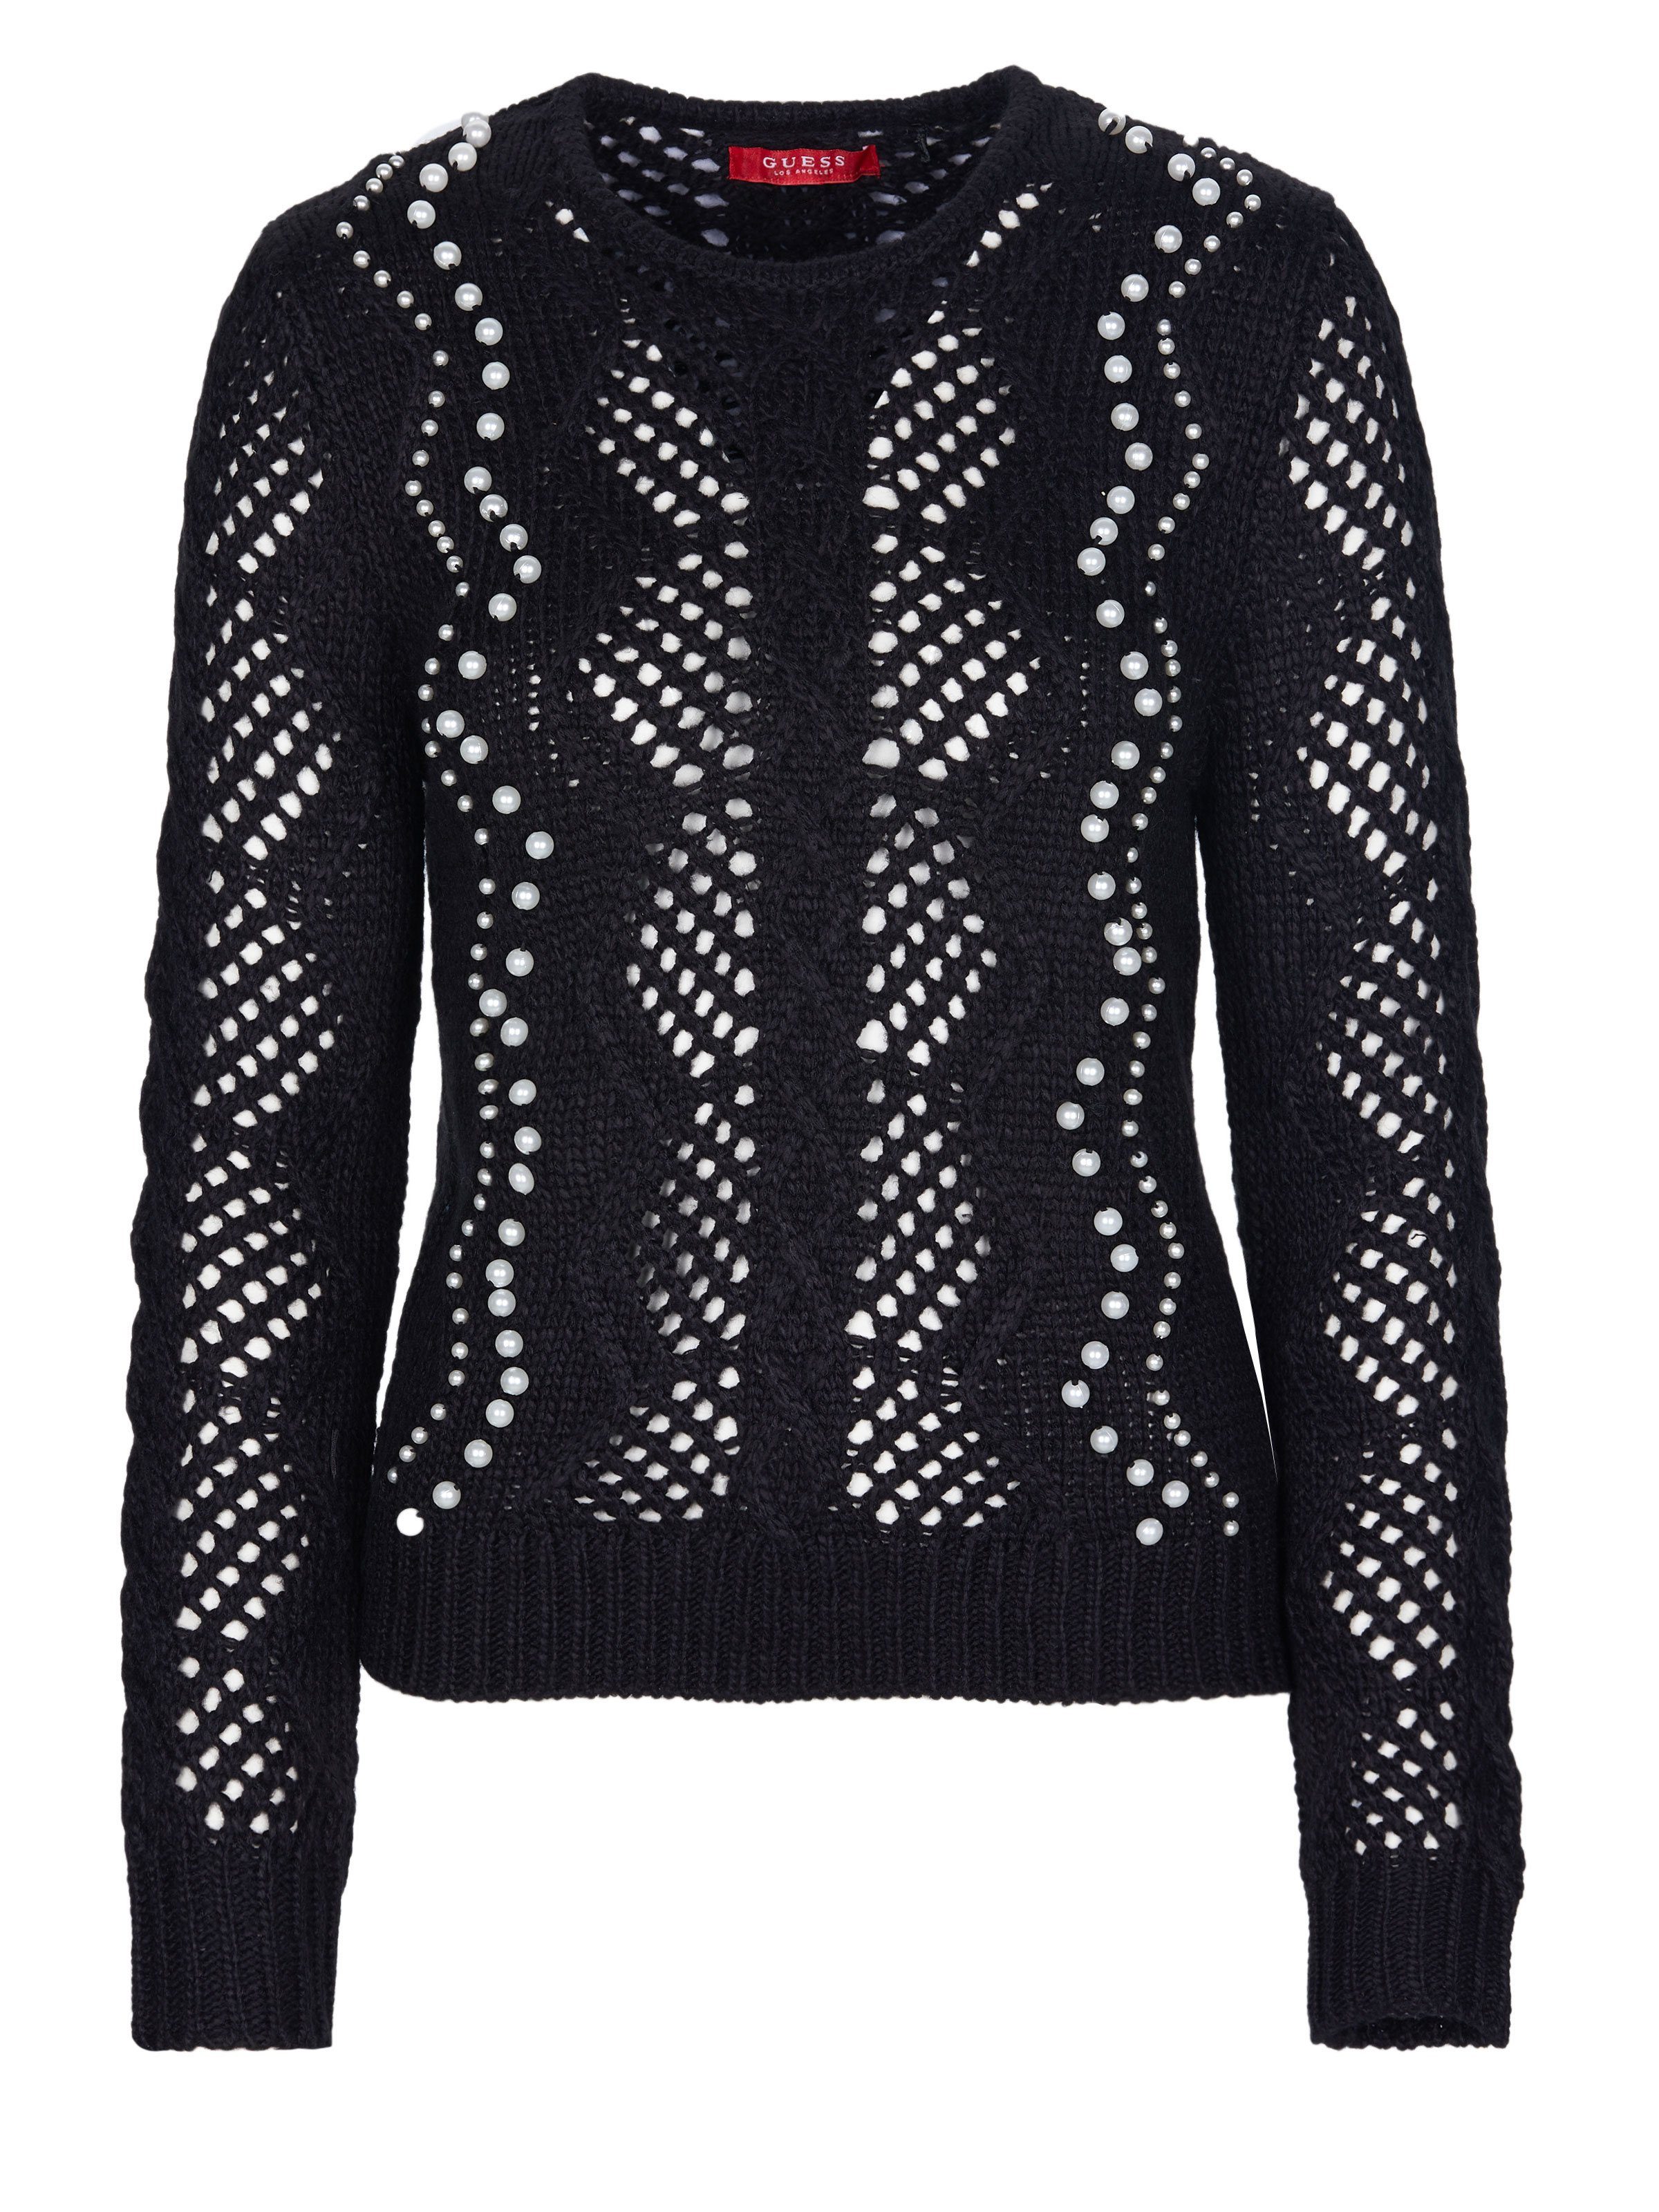 Guess Strickpullover GUESS Pullover schwarz